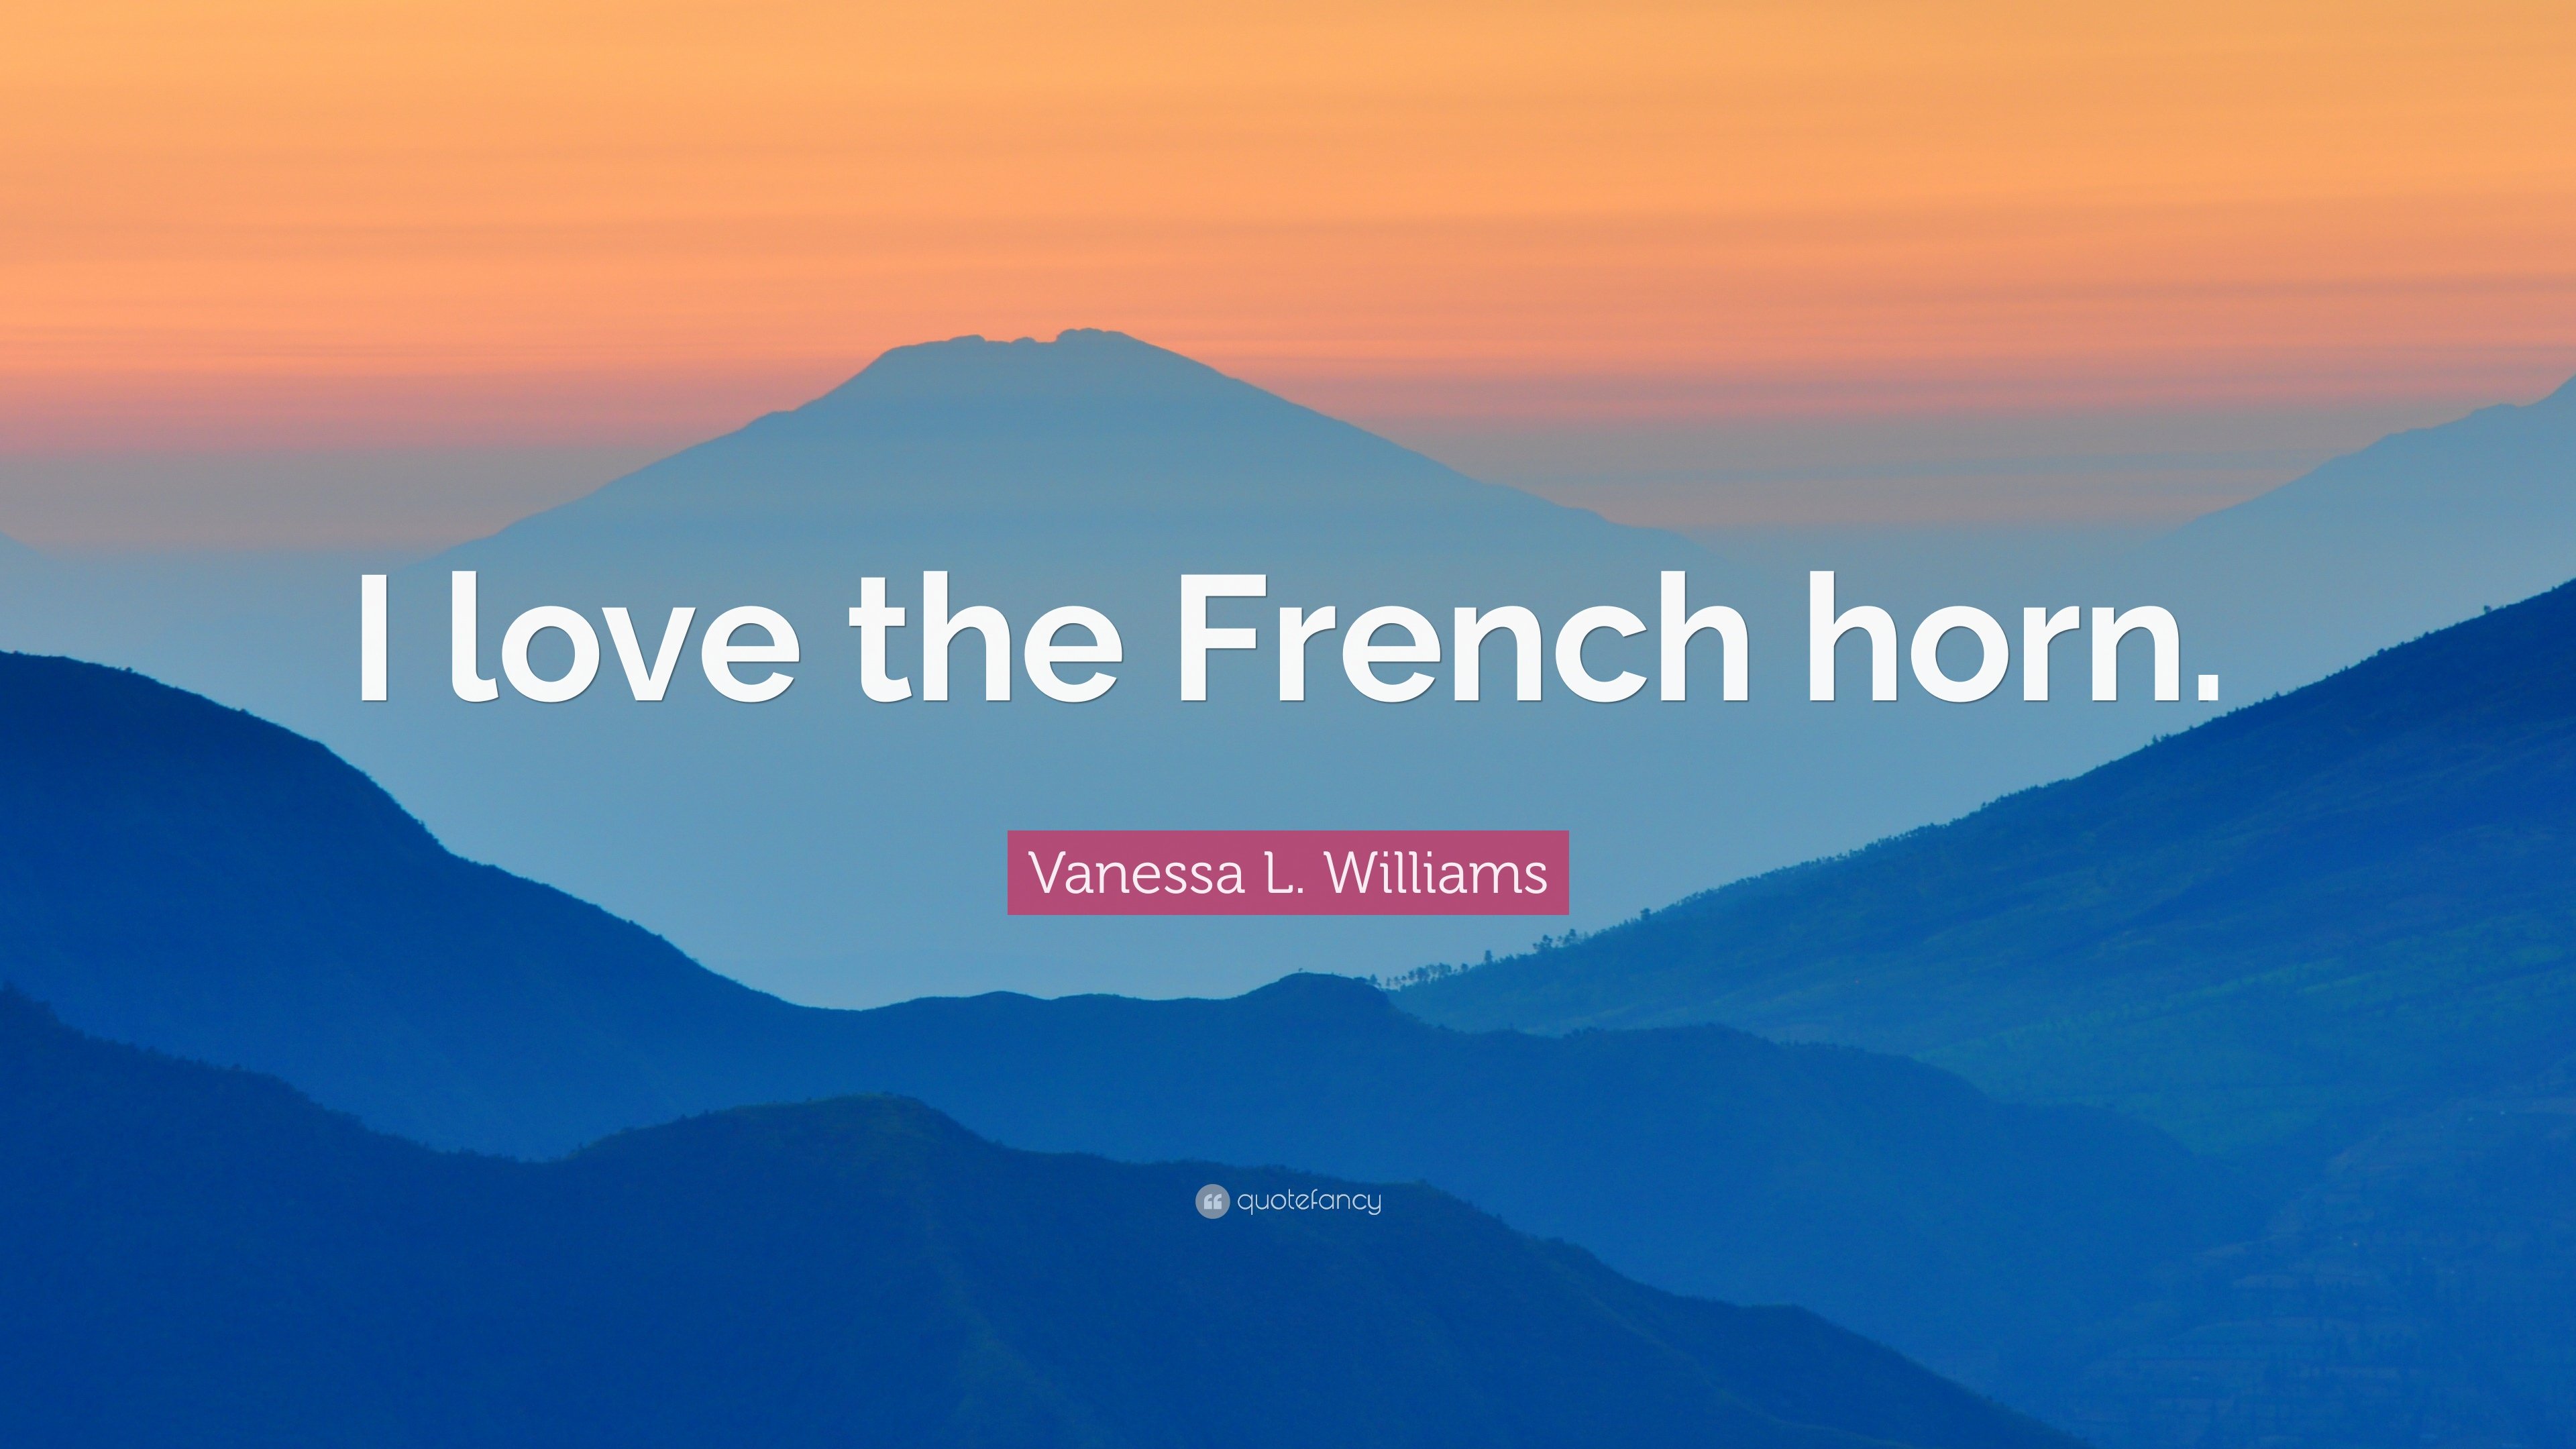 Vanessa L. Williams Quote: “I love the French horn.” 7 wallpaper